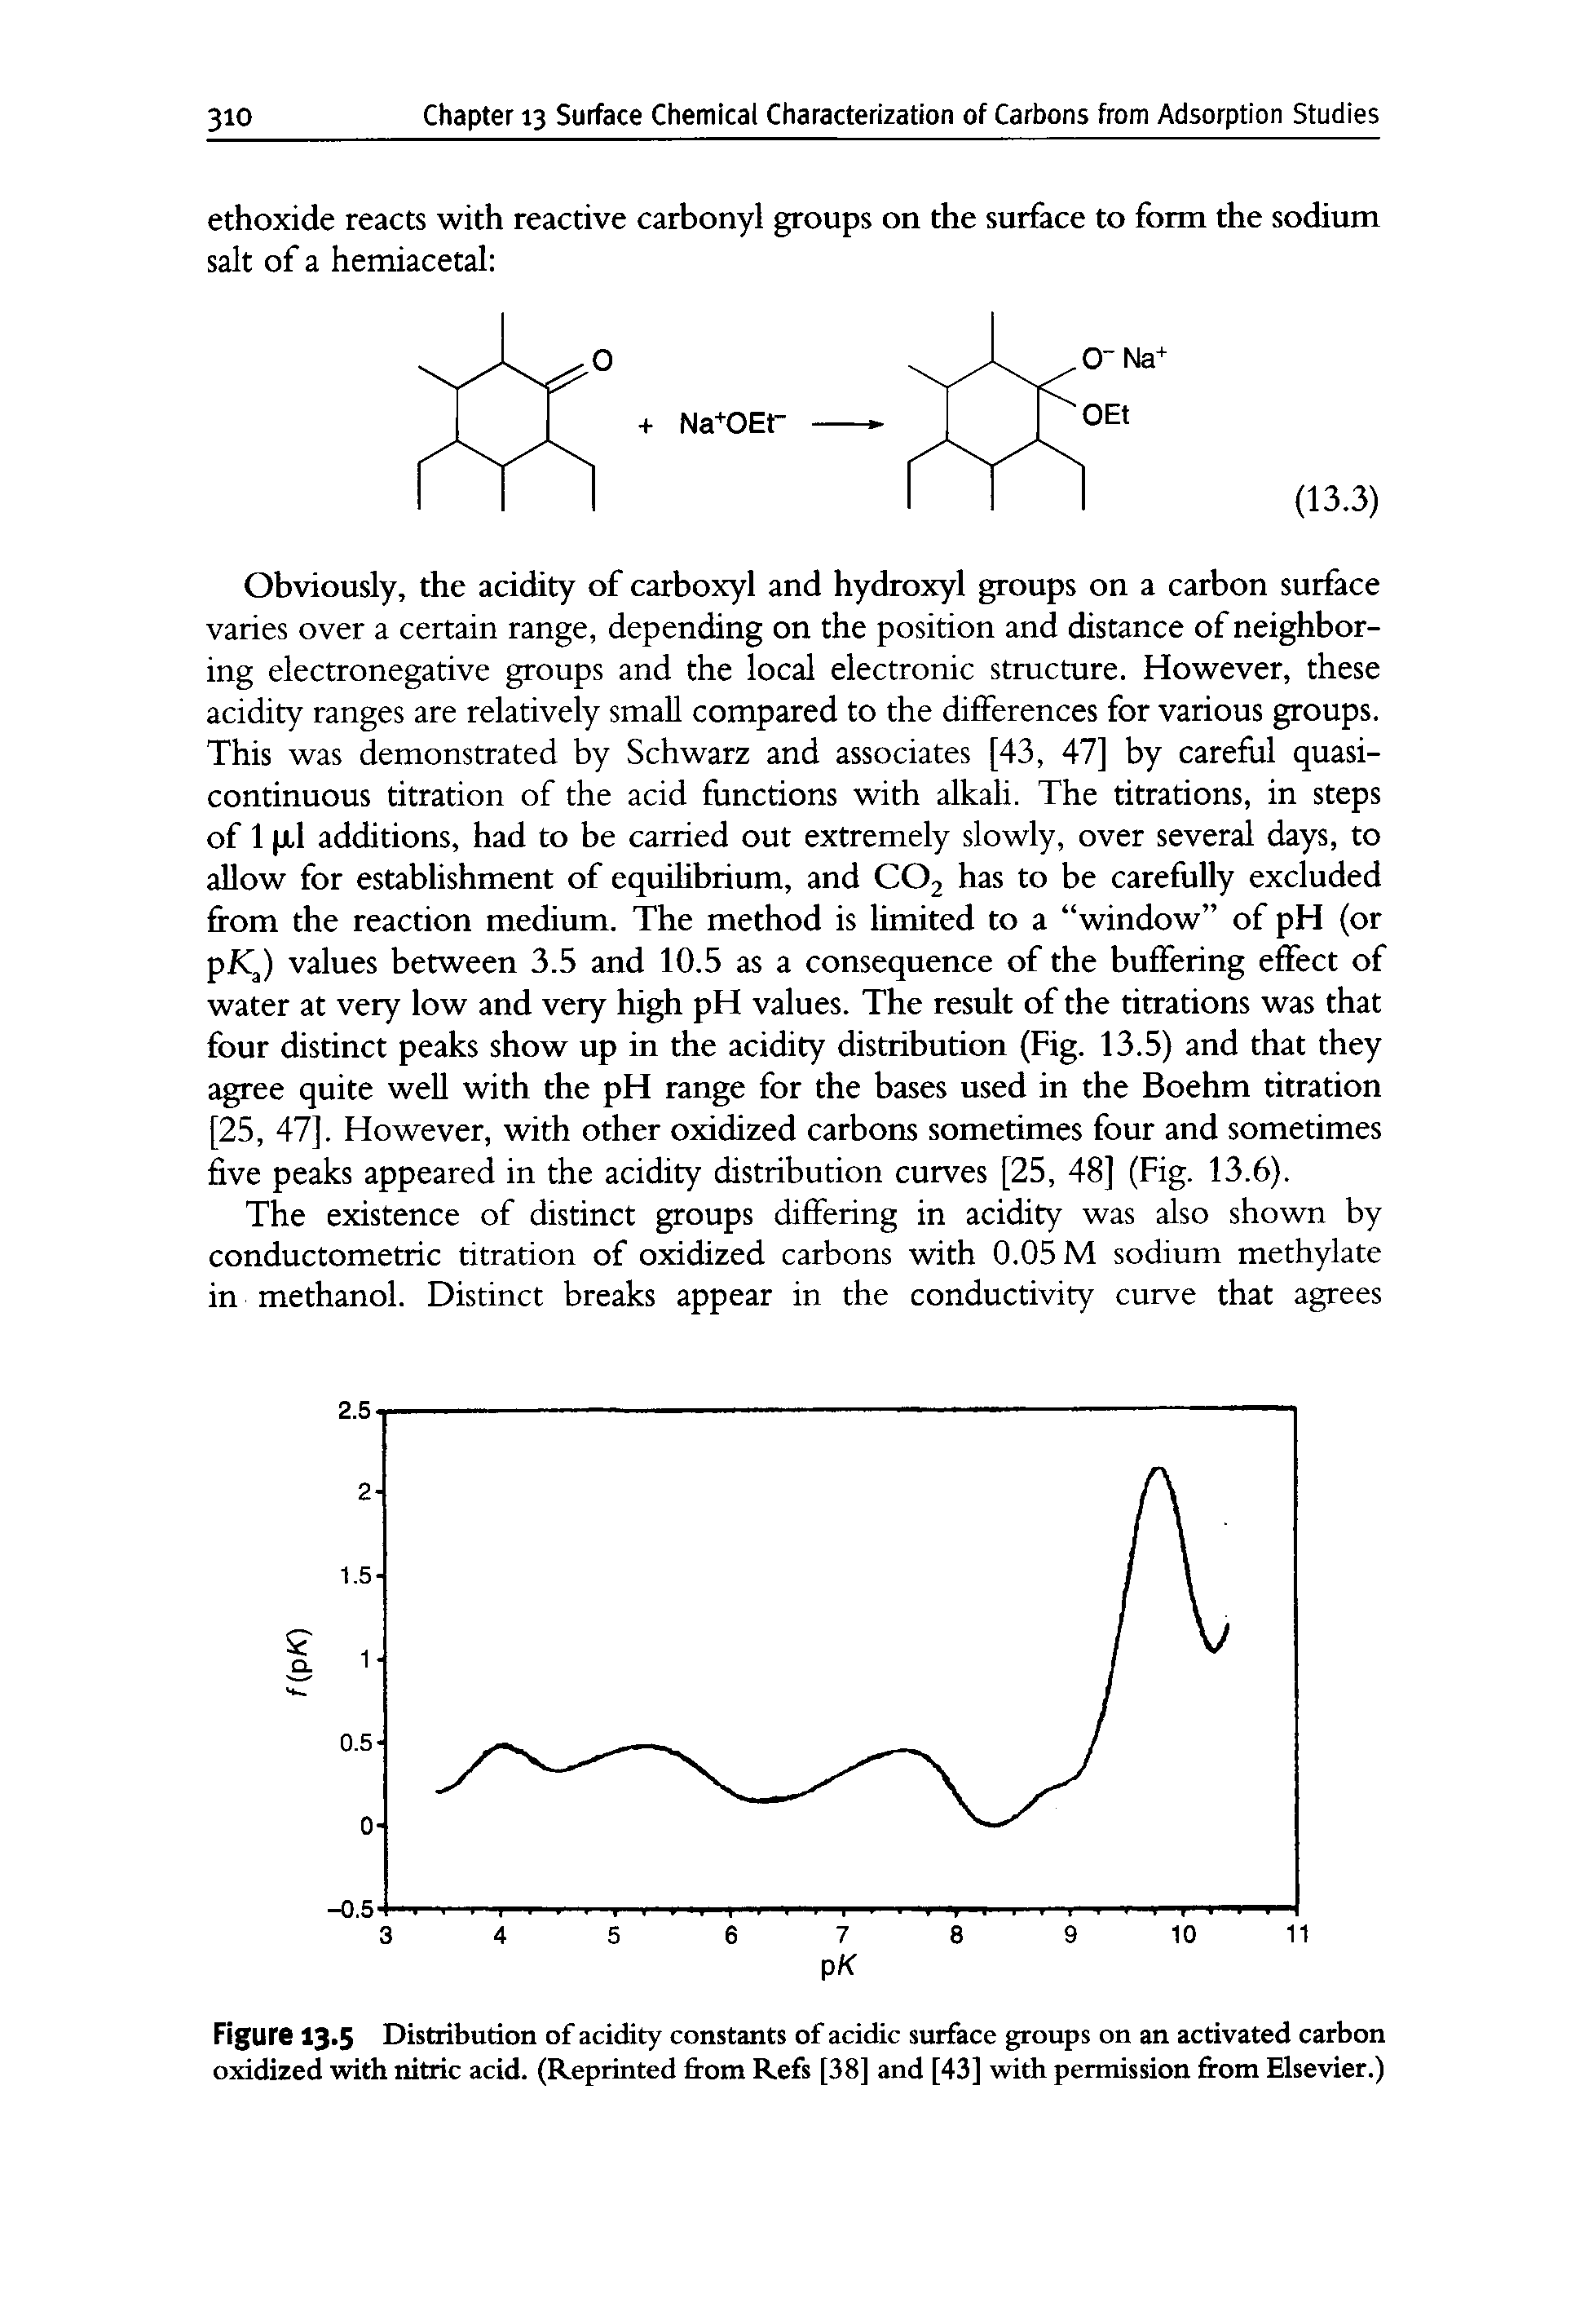 Figure 13.5 Distribution of acidity constants of acidic surface groups on an activated carbon oxidized with nitric acid. (Reprinted from Refs [38] and [43] with permission from Elsevier.)...